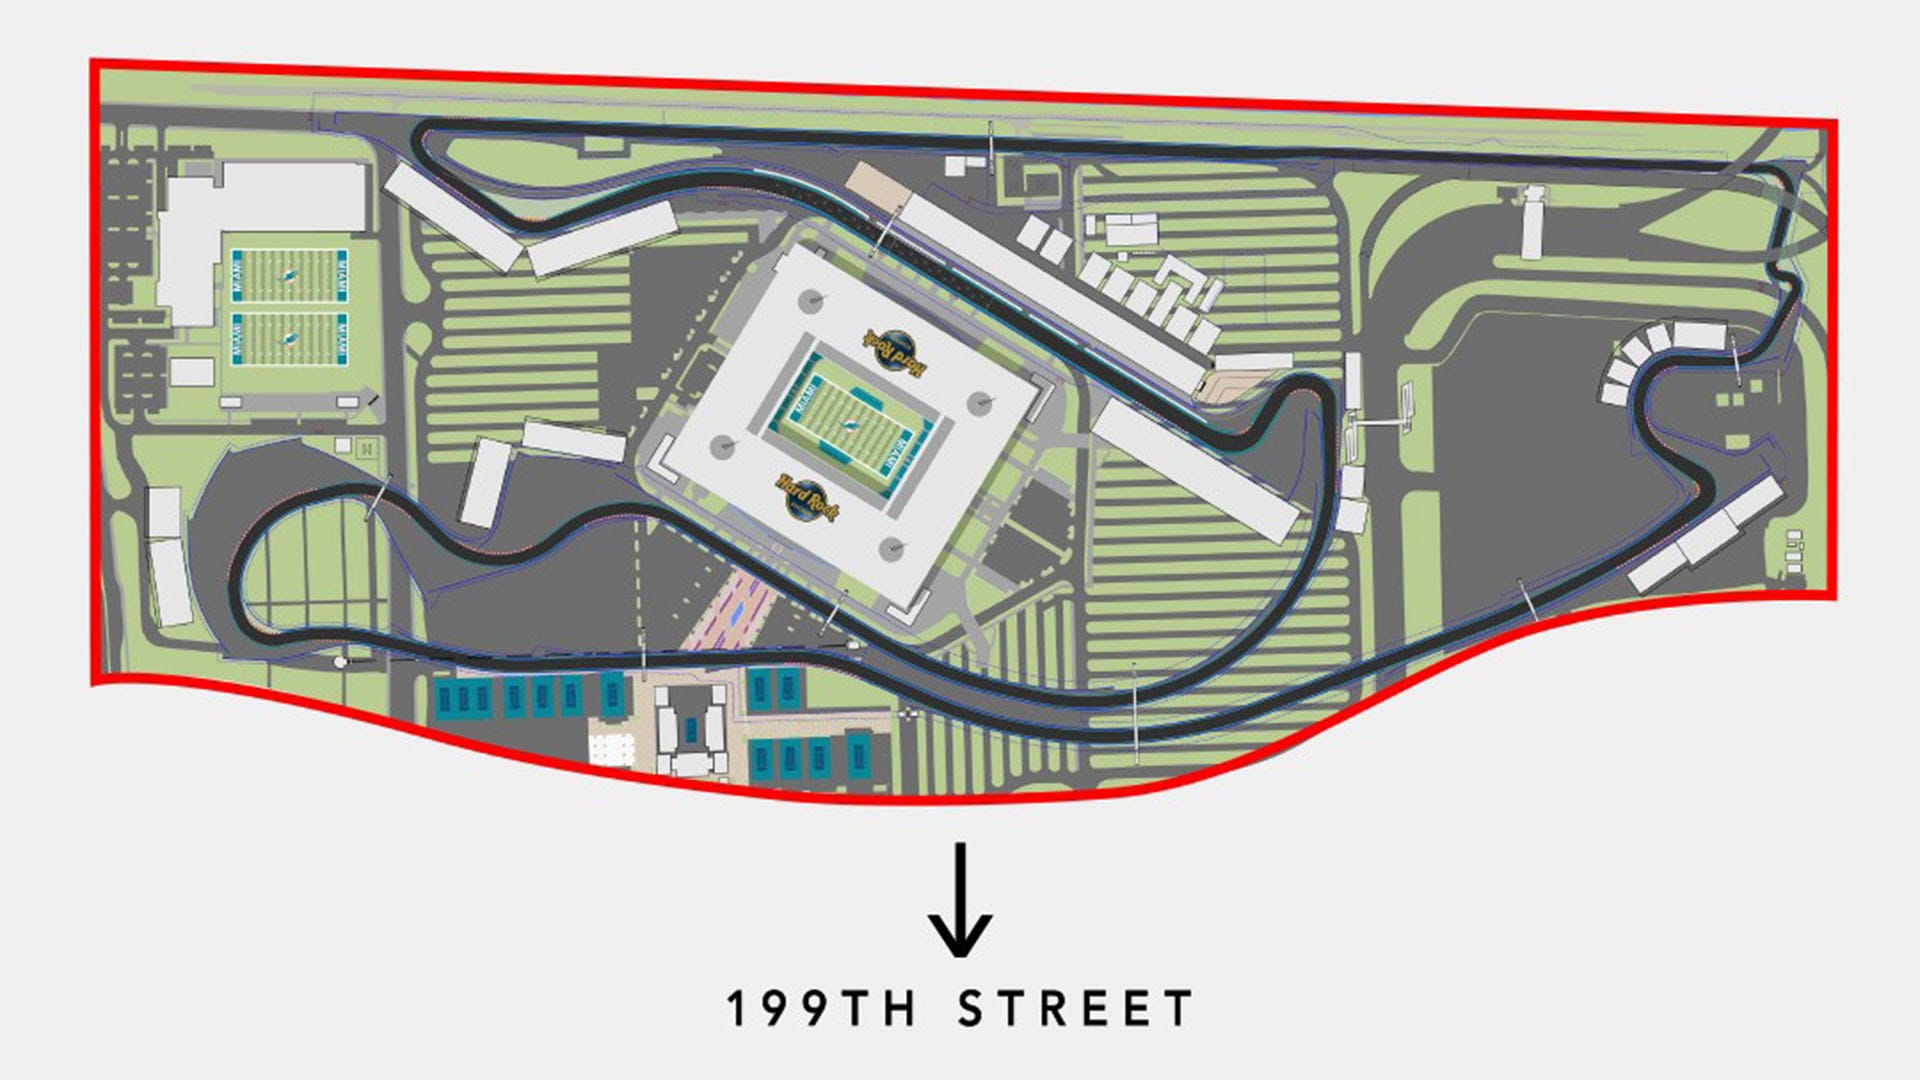 Changes made to proposed Miami Grand Prix track layout